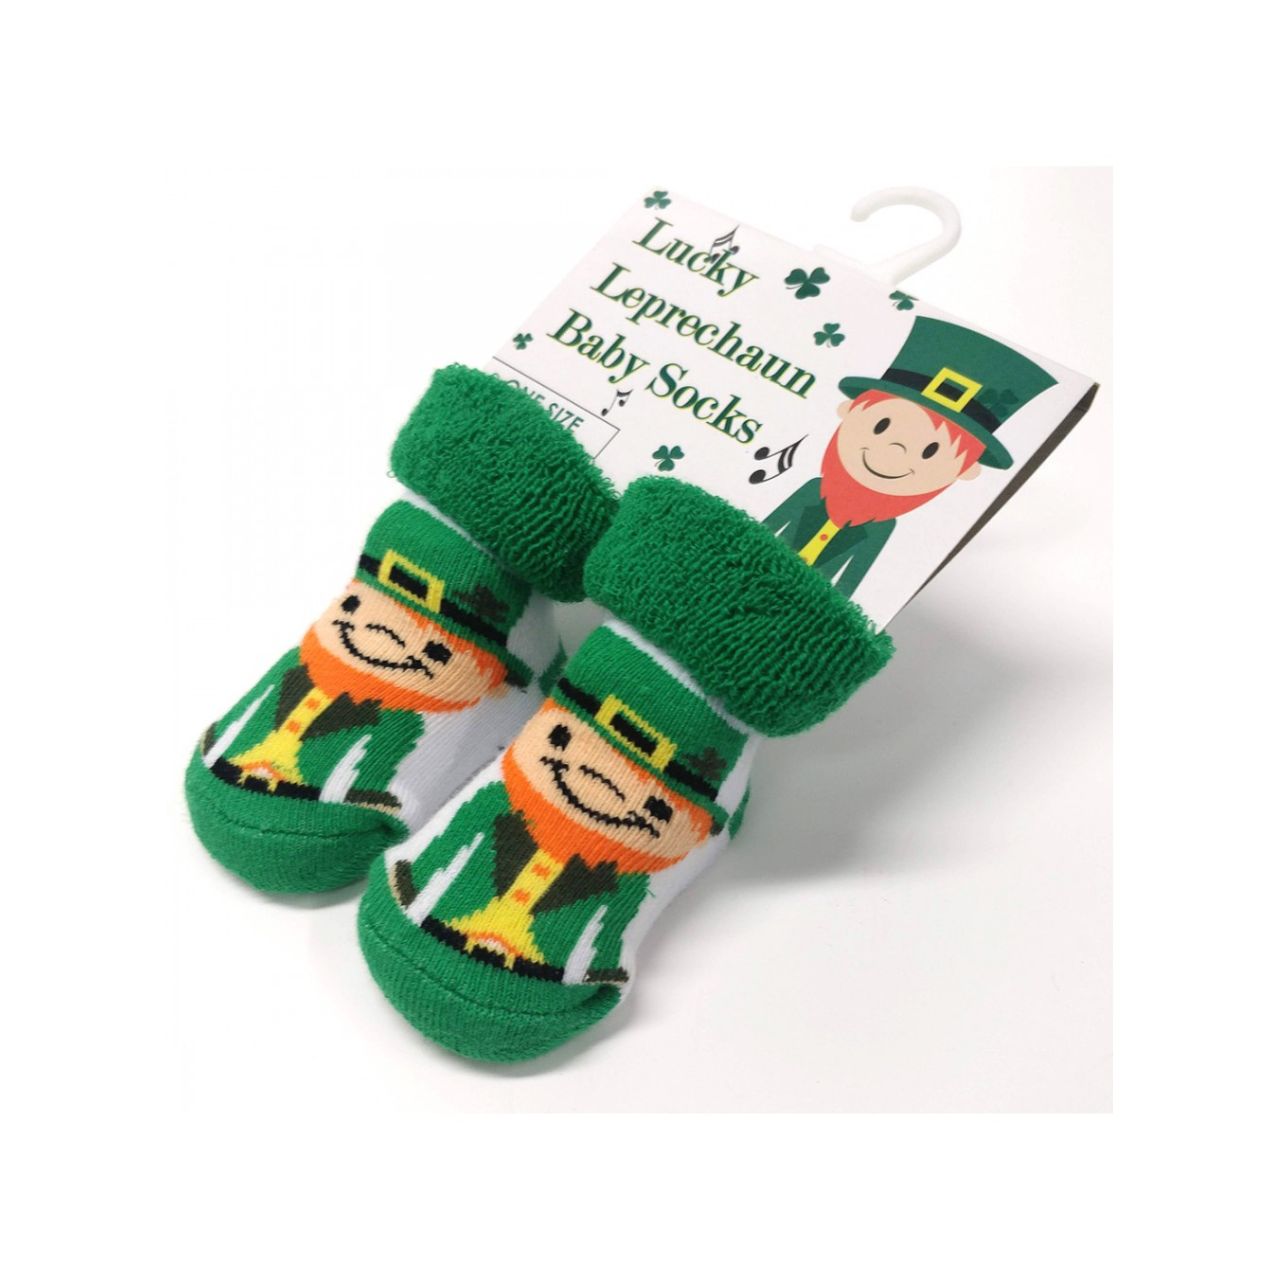 Green & White Leprechaun Toe Baby Booties  These fun green and white baby booties part of the Traditional Craft Official Collection. They feature a little leprechaun on each foot.